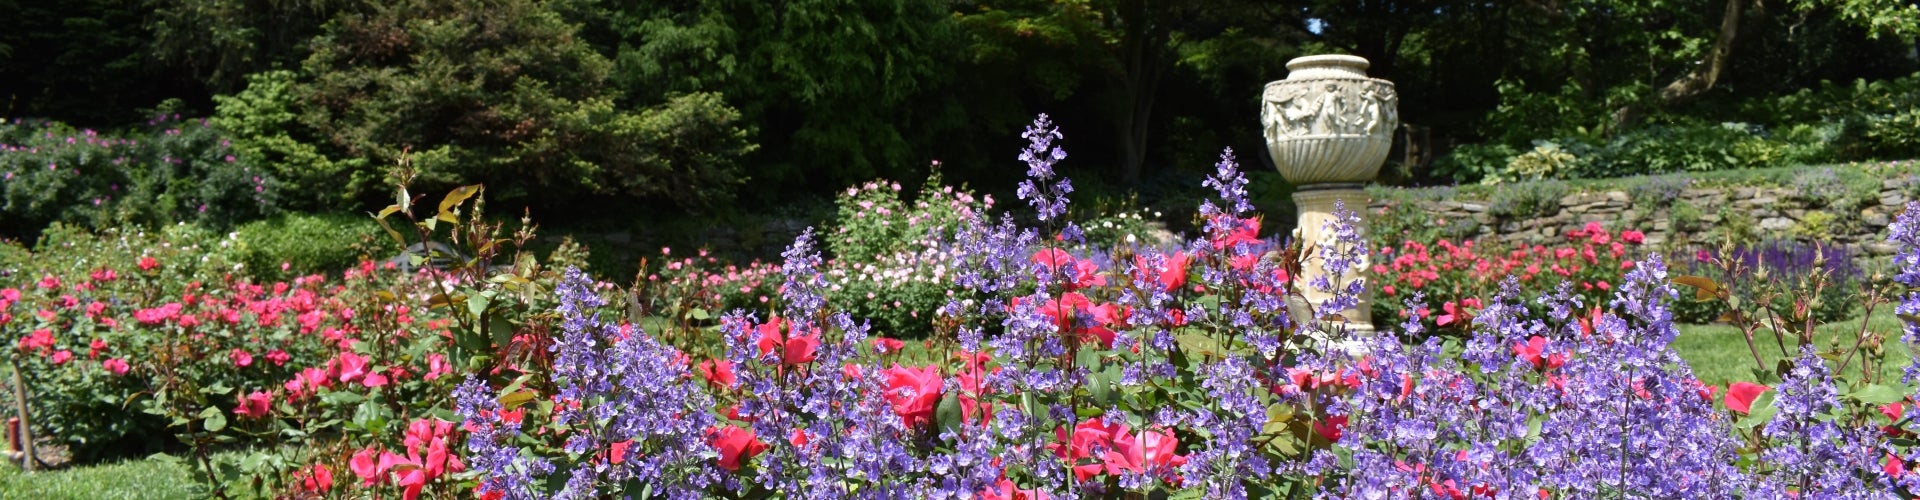 Rose Garden Ideas - How to Design with Roses